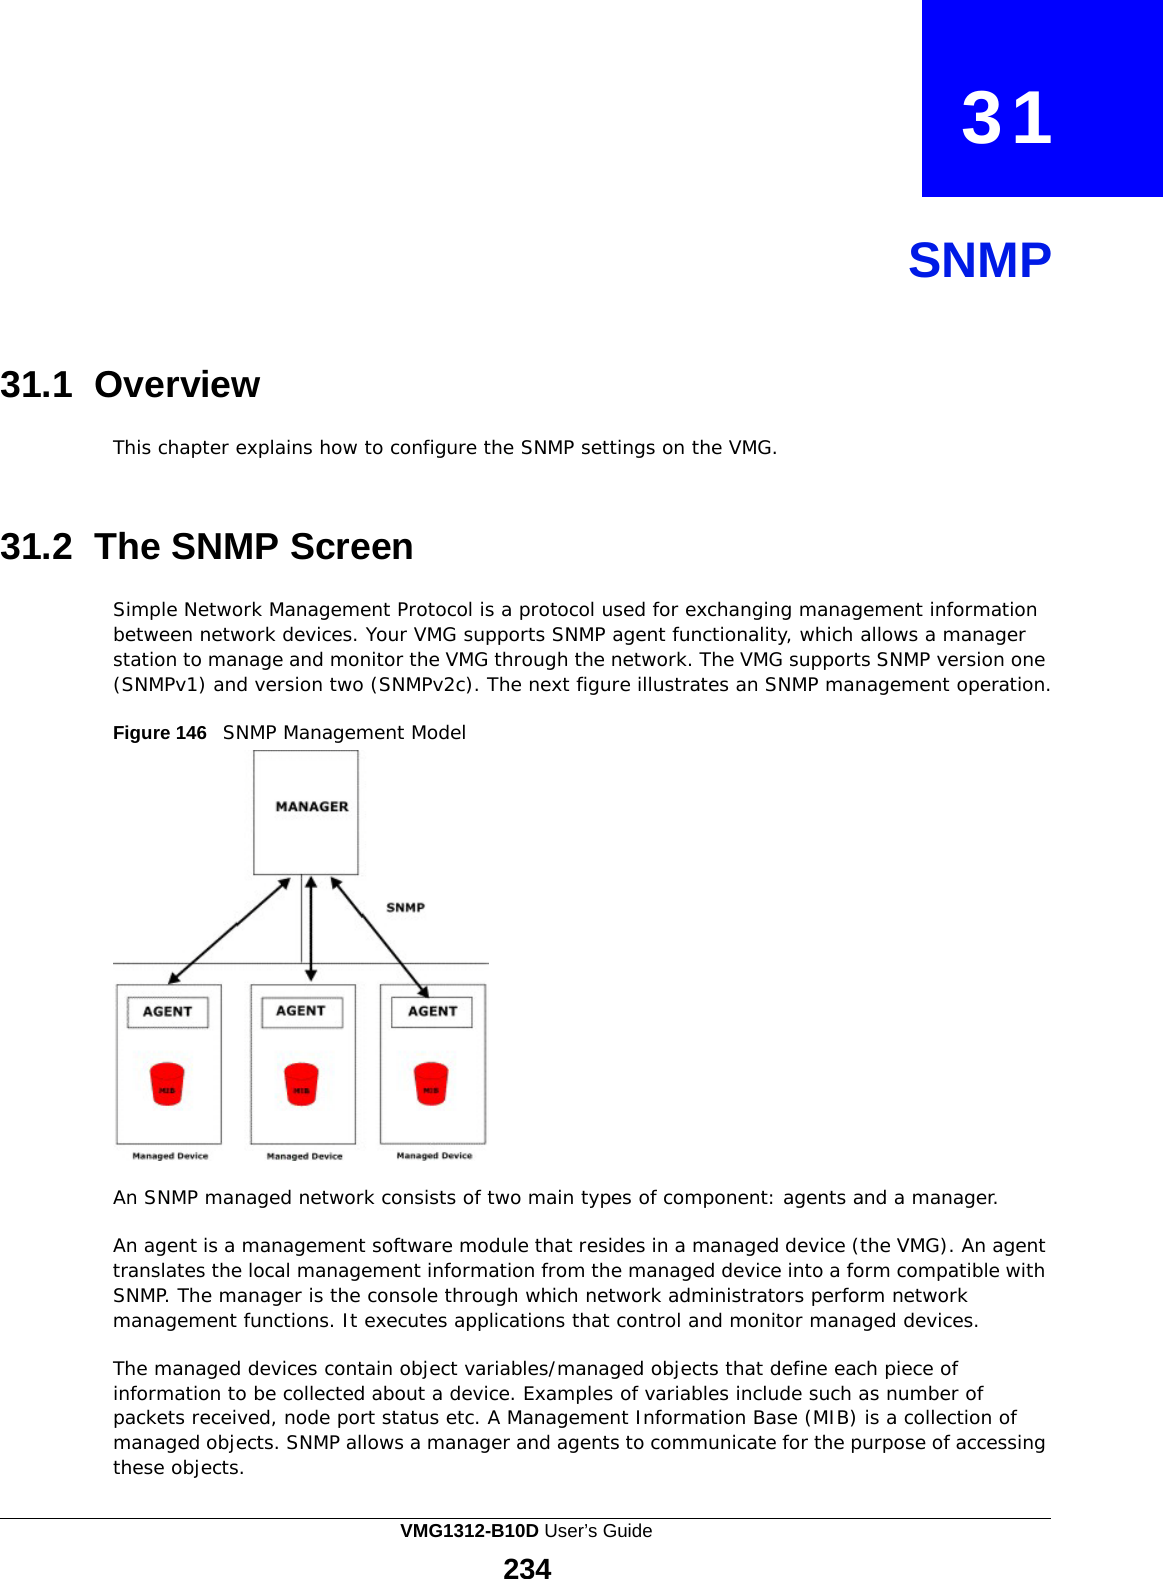  31     SNMP     31.1 Overview  This chapter explains how to configure the SNMP settings on the VMG.    31.2  The SNMP Screen  Simple Network Management Protocol is a protocol used for exchanging management information between network devices. Your VMG supports SNMP agent functionality, which allows a manager station to manage and monitor the VMG through the network. The VMG supports SNMP version one (SNMPv1) and version two (SNMPv2c). The next figure illustrates an SNMP management operation.  Figure 146   SNMP Management Model   An SNMP managed network consists of two main types of component: agents and a manager.  An agent is a management software module that resides in a managed device (the VMG). An agent translates the local management information from the managed device into a form compatible with SNMP. The manager is the console through which network administrators perform network management functions. It executes applications that control and monitor managed devices.  The managed devices contain object variables/managed objects that define each piece of information to be collected about a device. Examples of variables include such as number of packets received, node port status etc. A Management Information Base (MIB) is a collection of managed objects. SNMP allows a manager and agents to communicate for the purpose of accessing these objects. VMG1312-B10D User’s Guide 234  